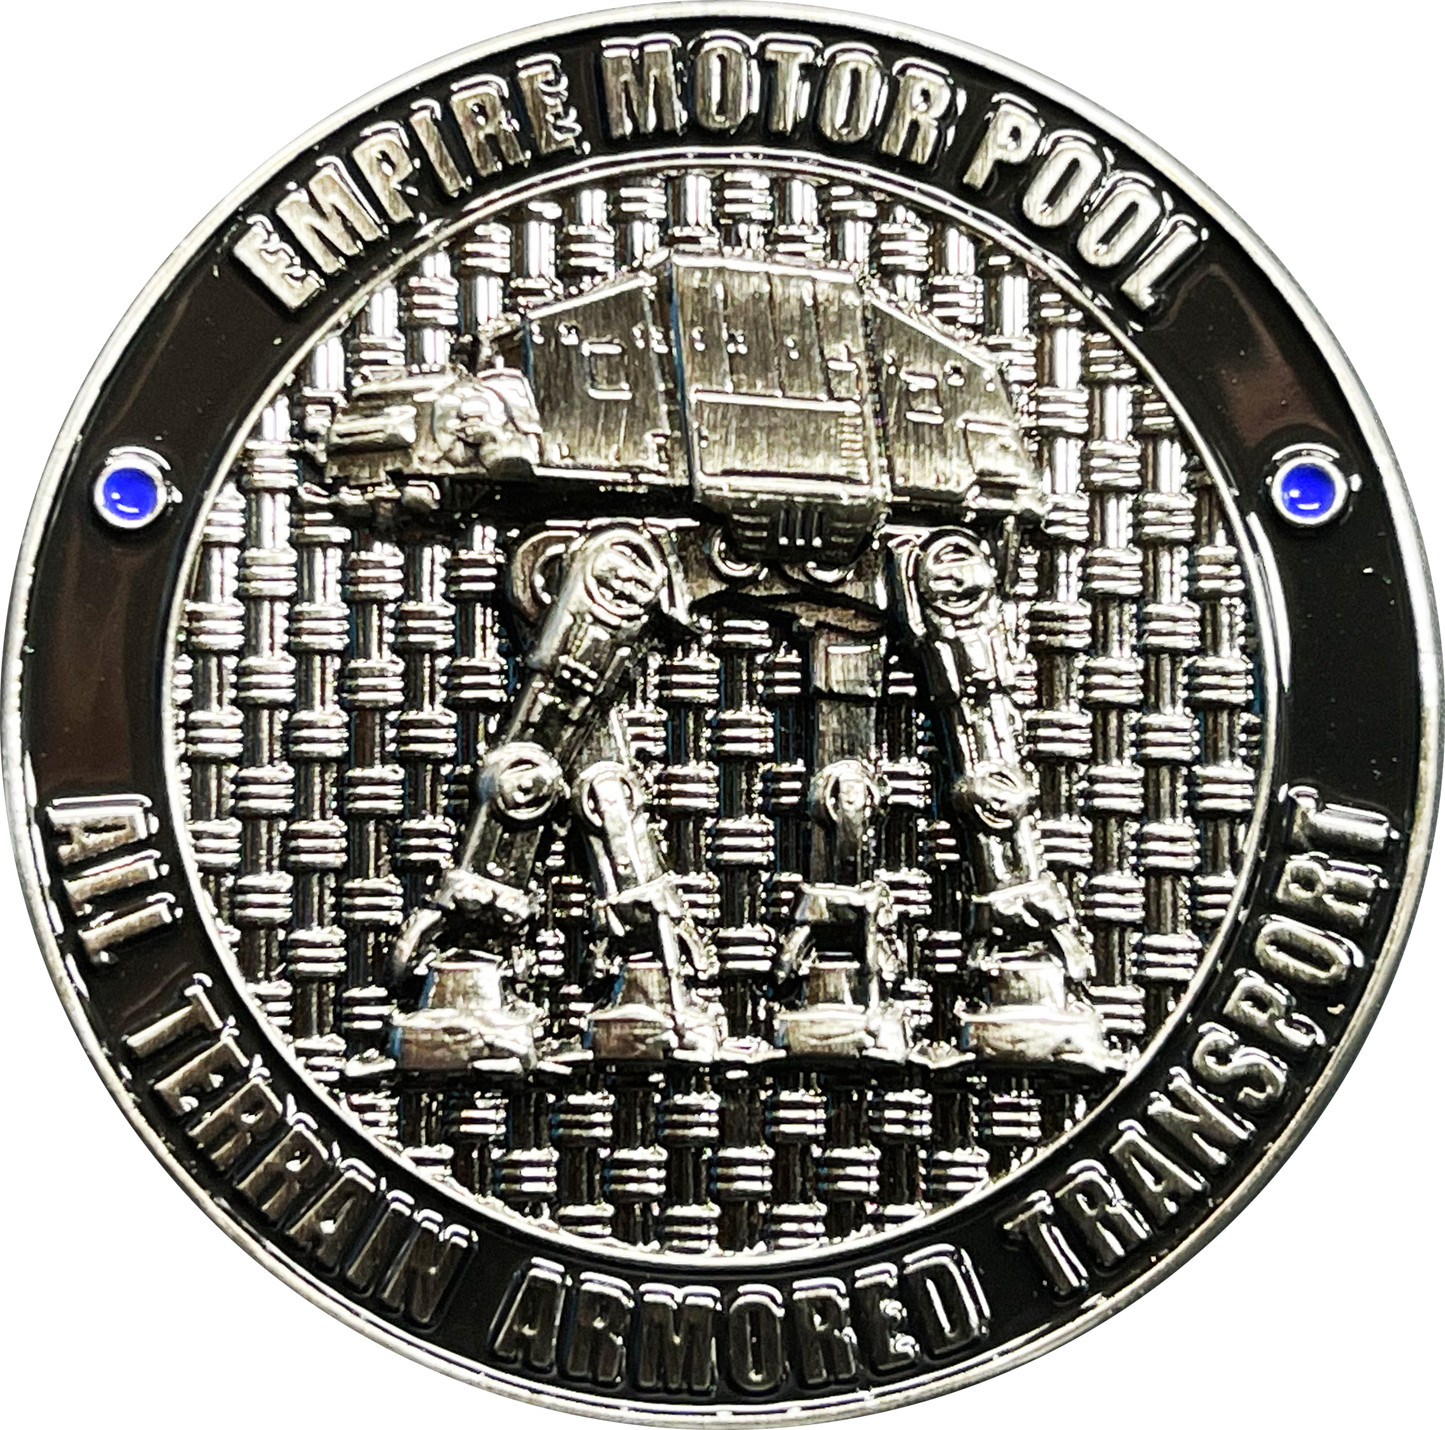 BL4-006 AT-AT Walker All Terrain Armored Transport TACTICAL TERRORISM RESPONSE TEAM TTRT CBP Challenge Coin